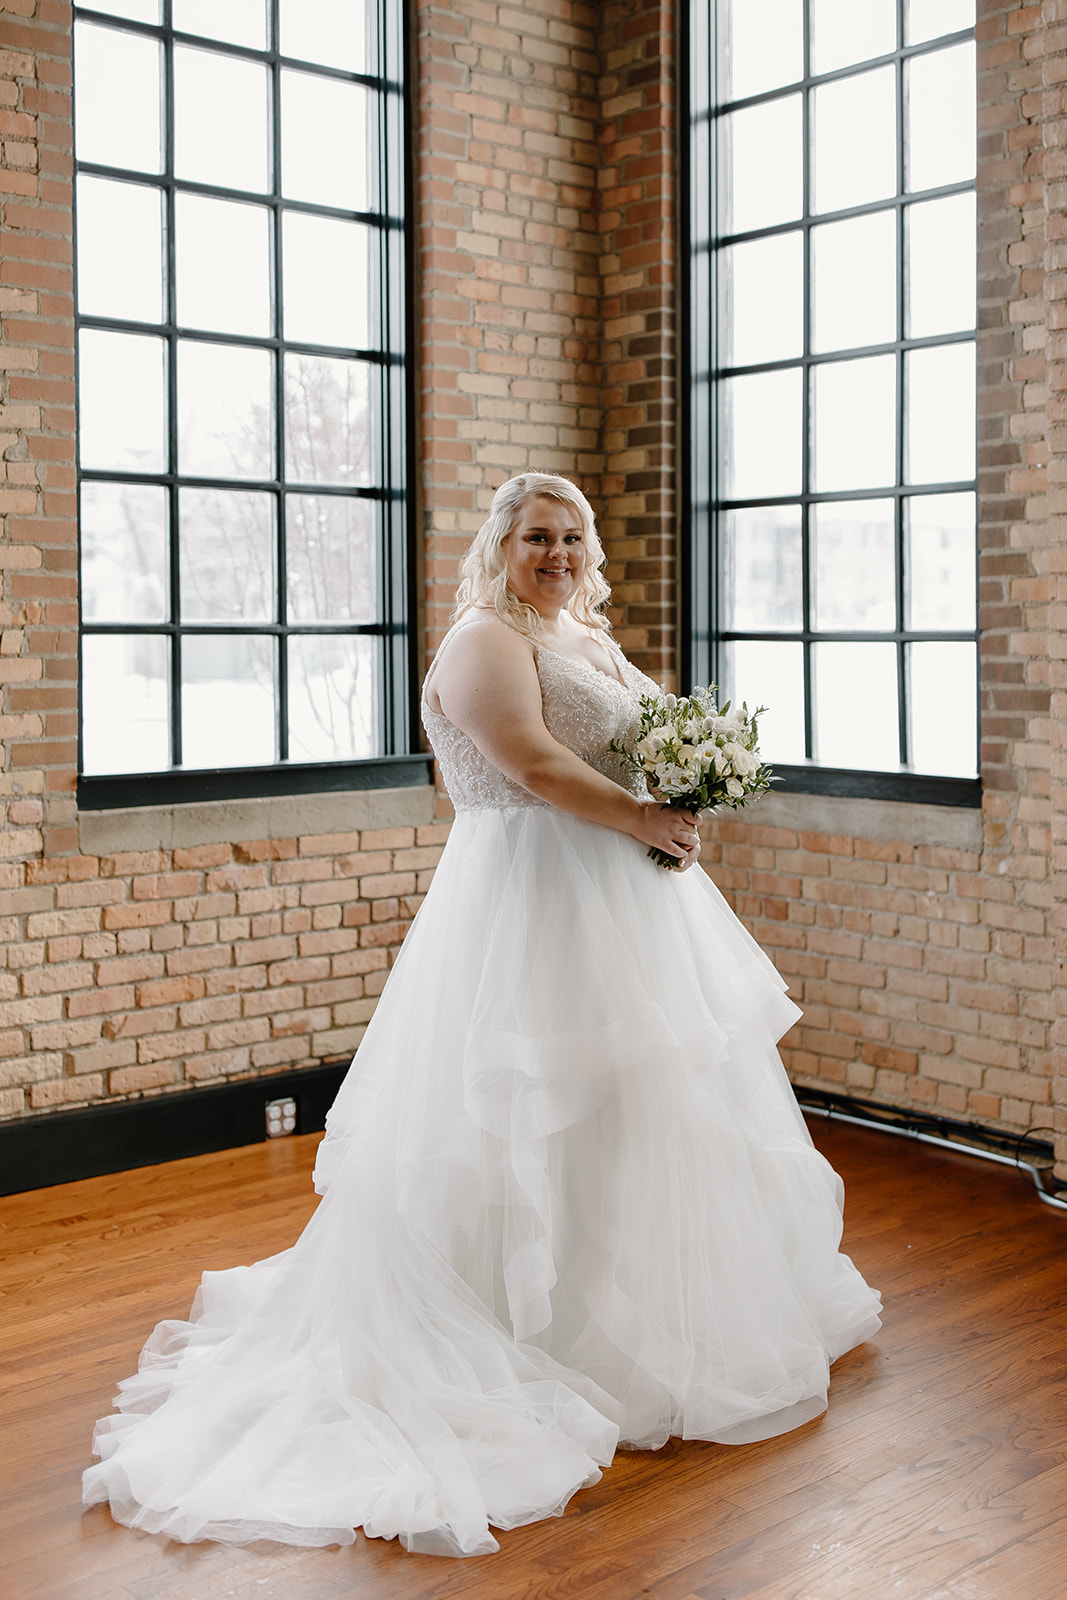 Bride smiling in front of windows